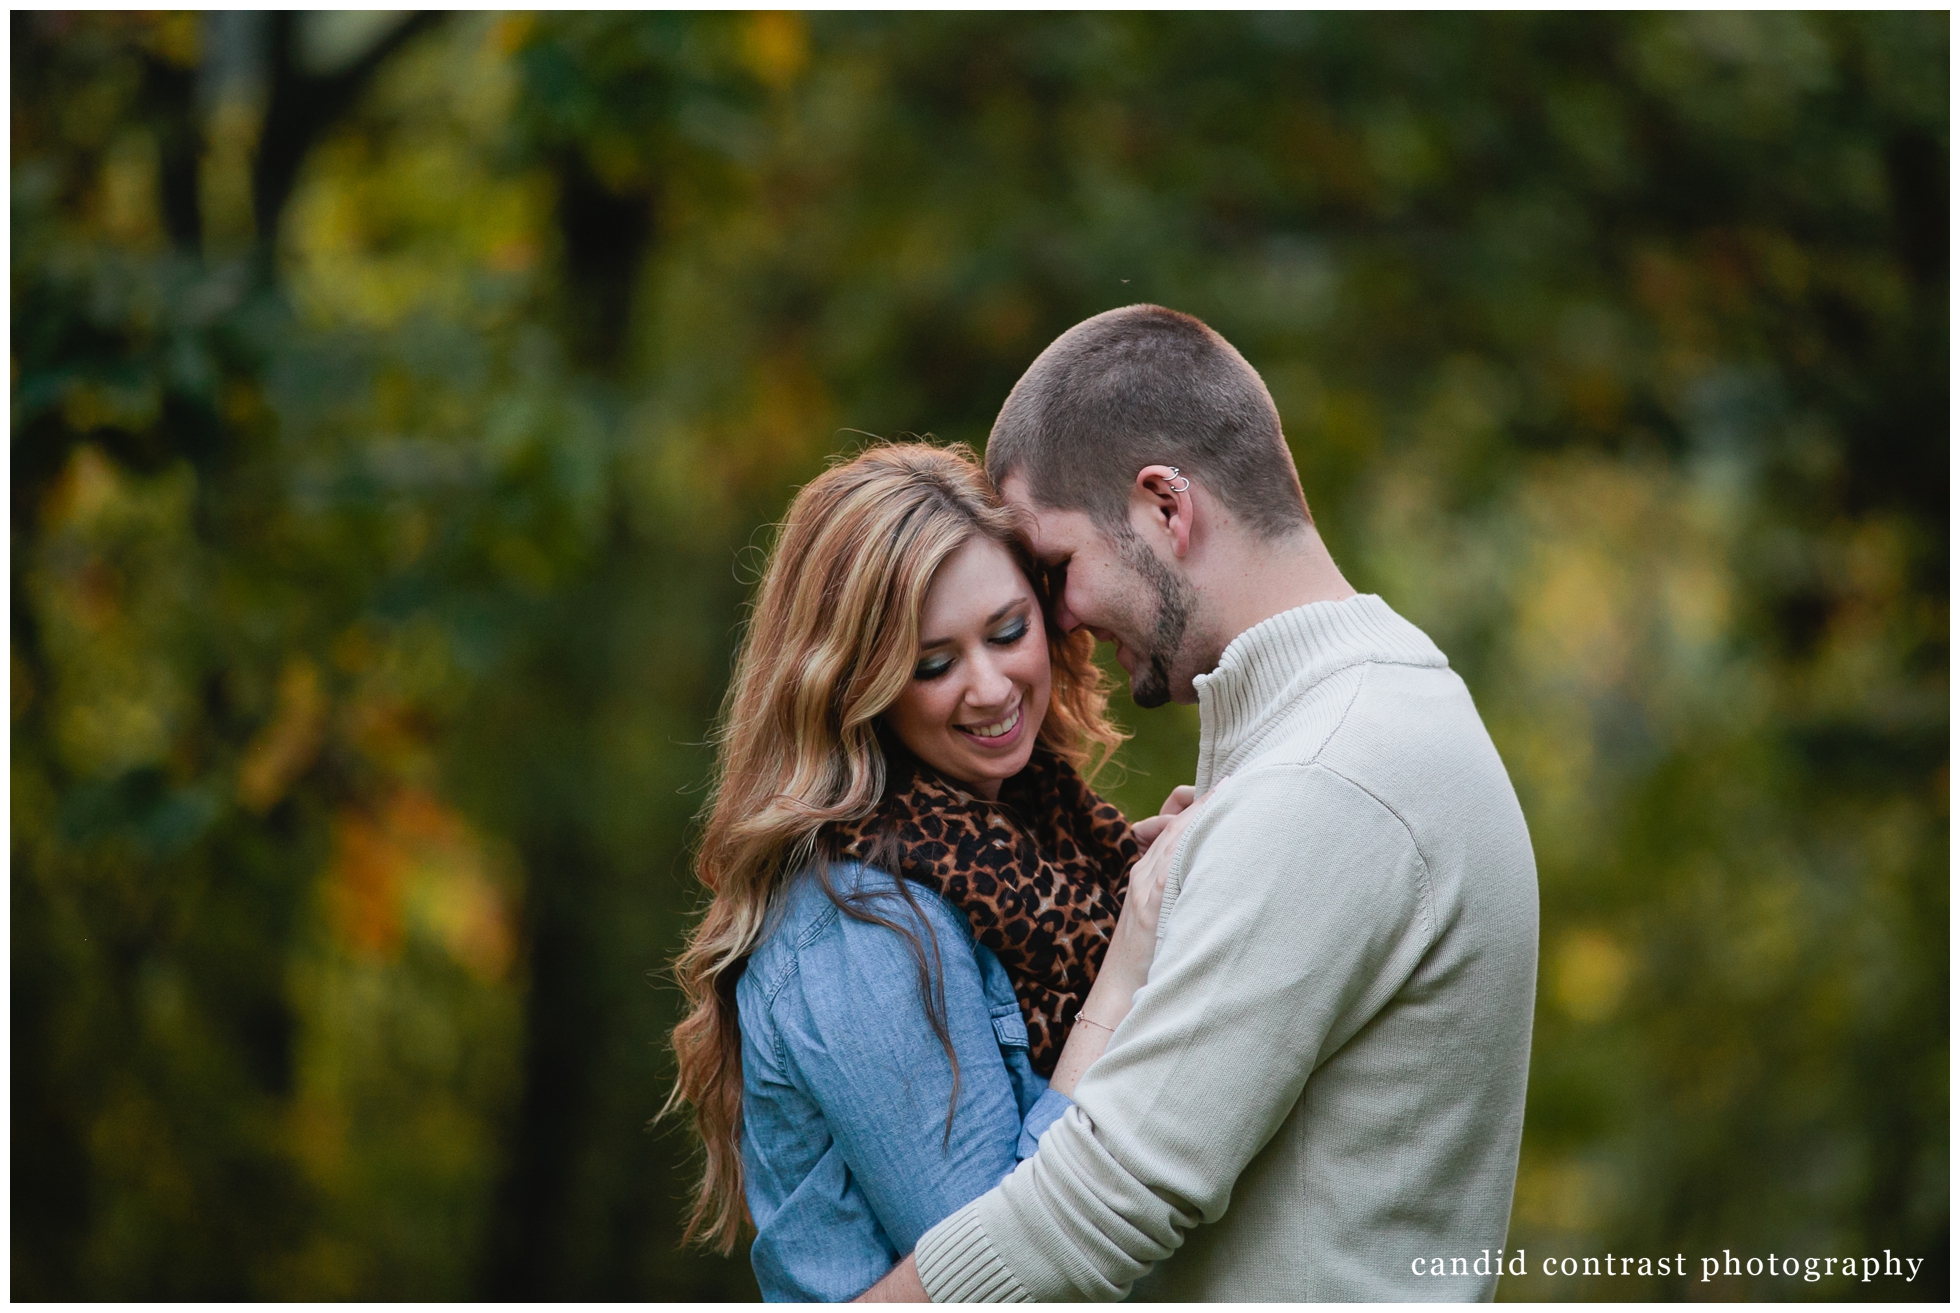 modern engagement photos in eagle point park in dubuque, ia, wedding photographer candid contrast photography